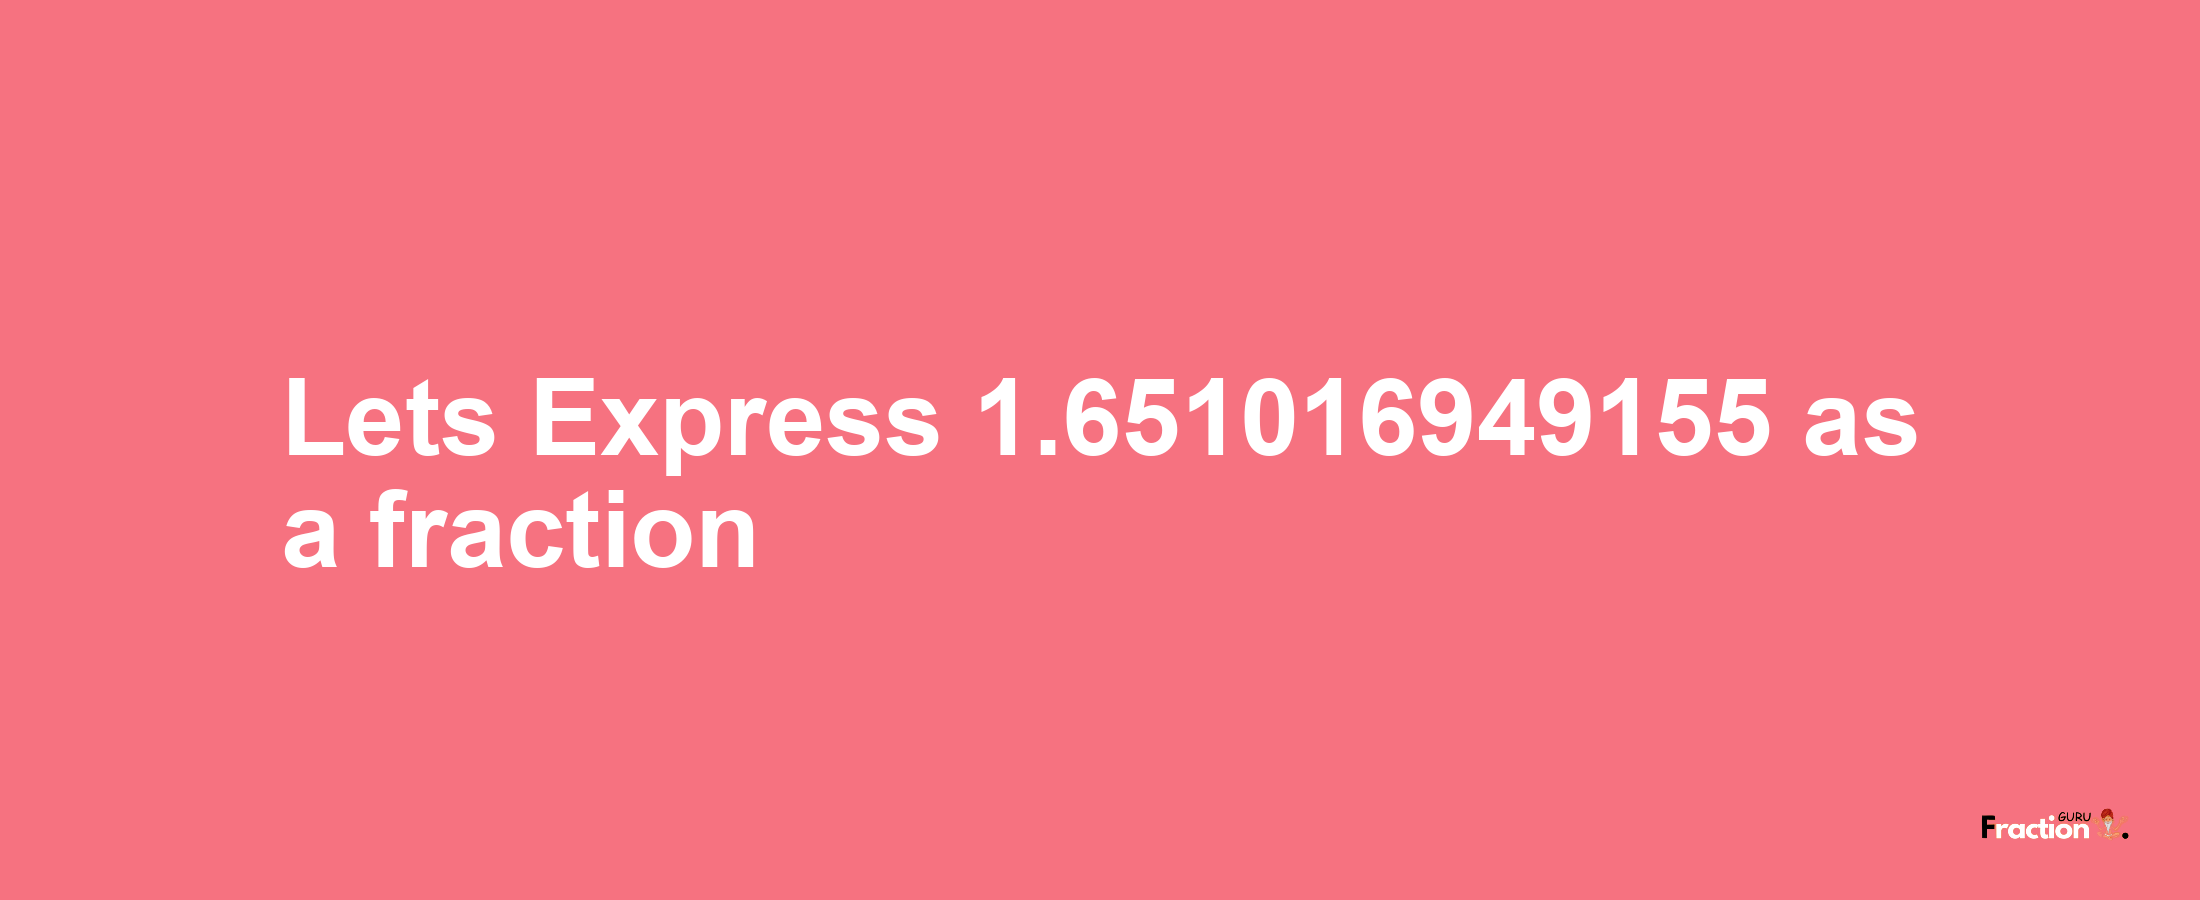 Lets Express 1.651016949155 as afraction